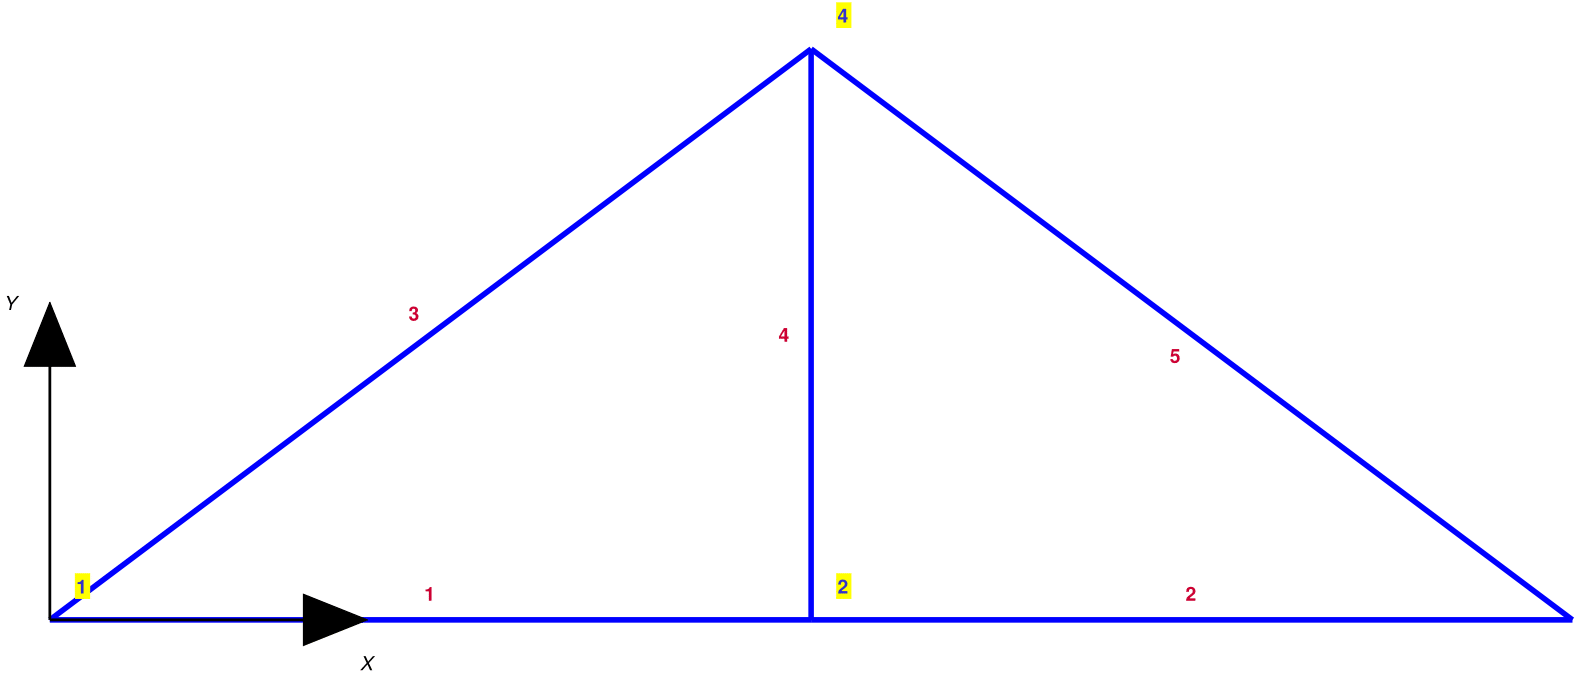 Display of 2d truss model with default values for graphic objects